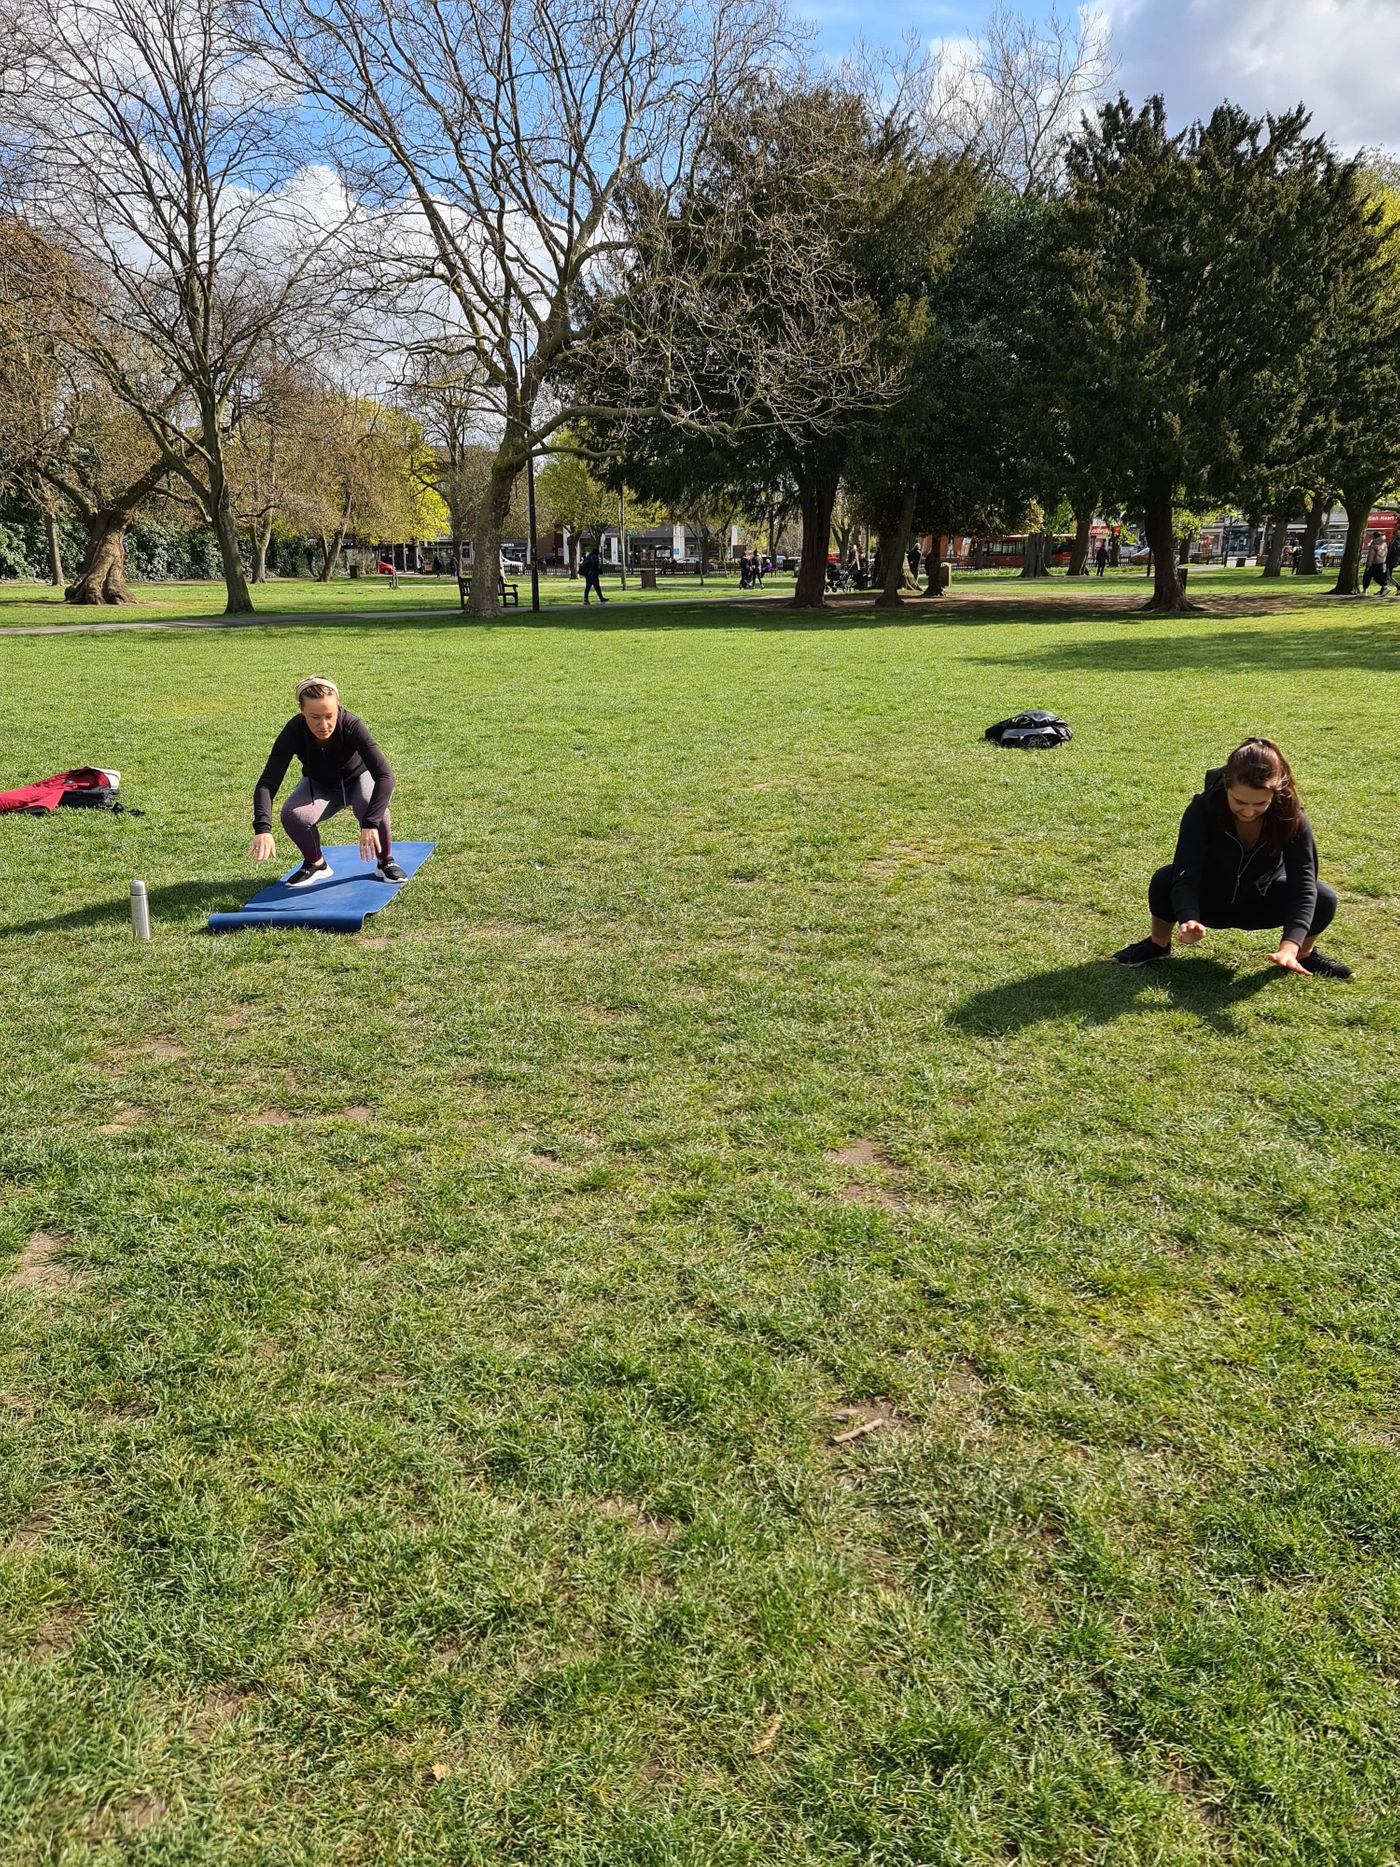 Perfect weather for outdoor class today in Wanstead🙂